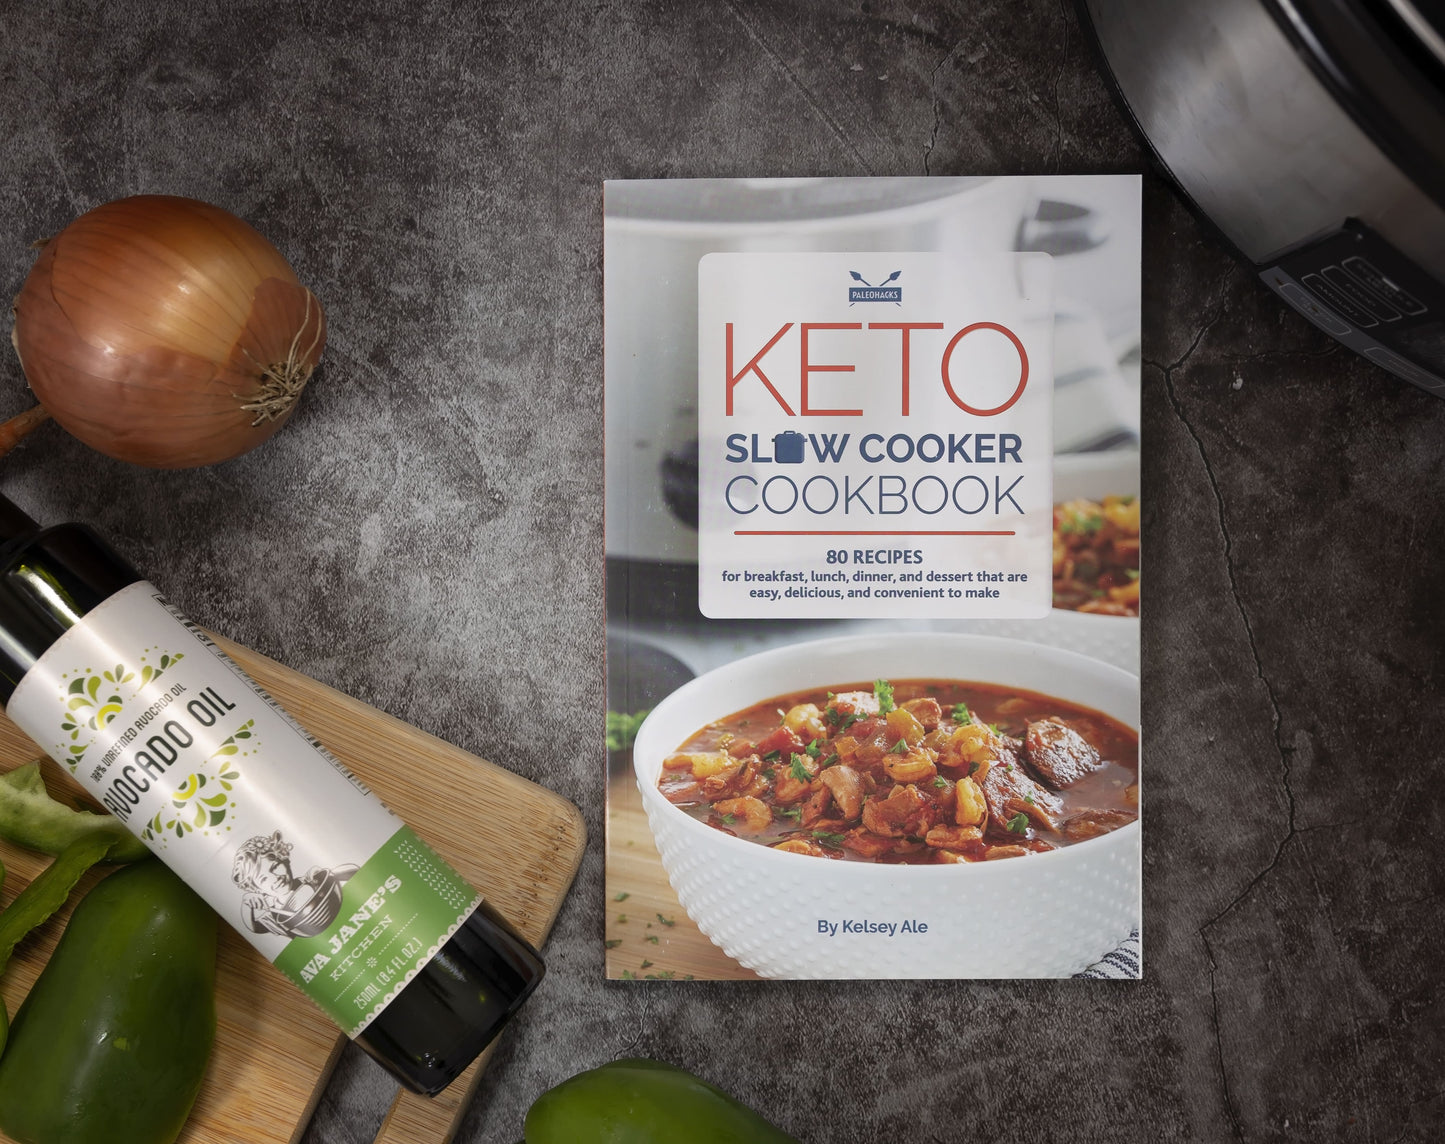 The Keto Slow Cookbook is laid on a plain grey surface. Avocado oil and vegetables can be seen on a wooden board.